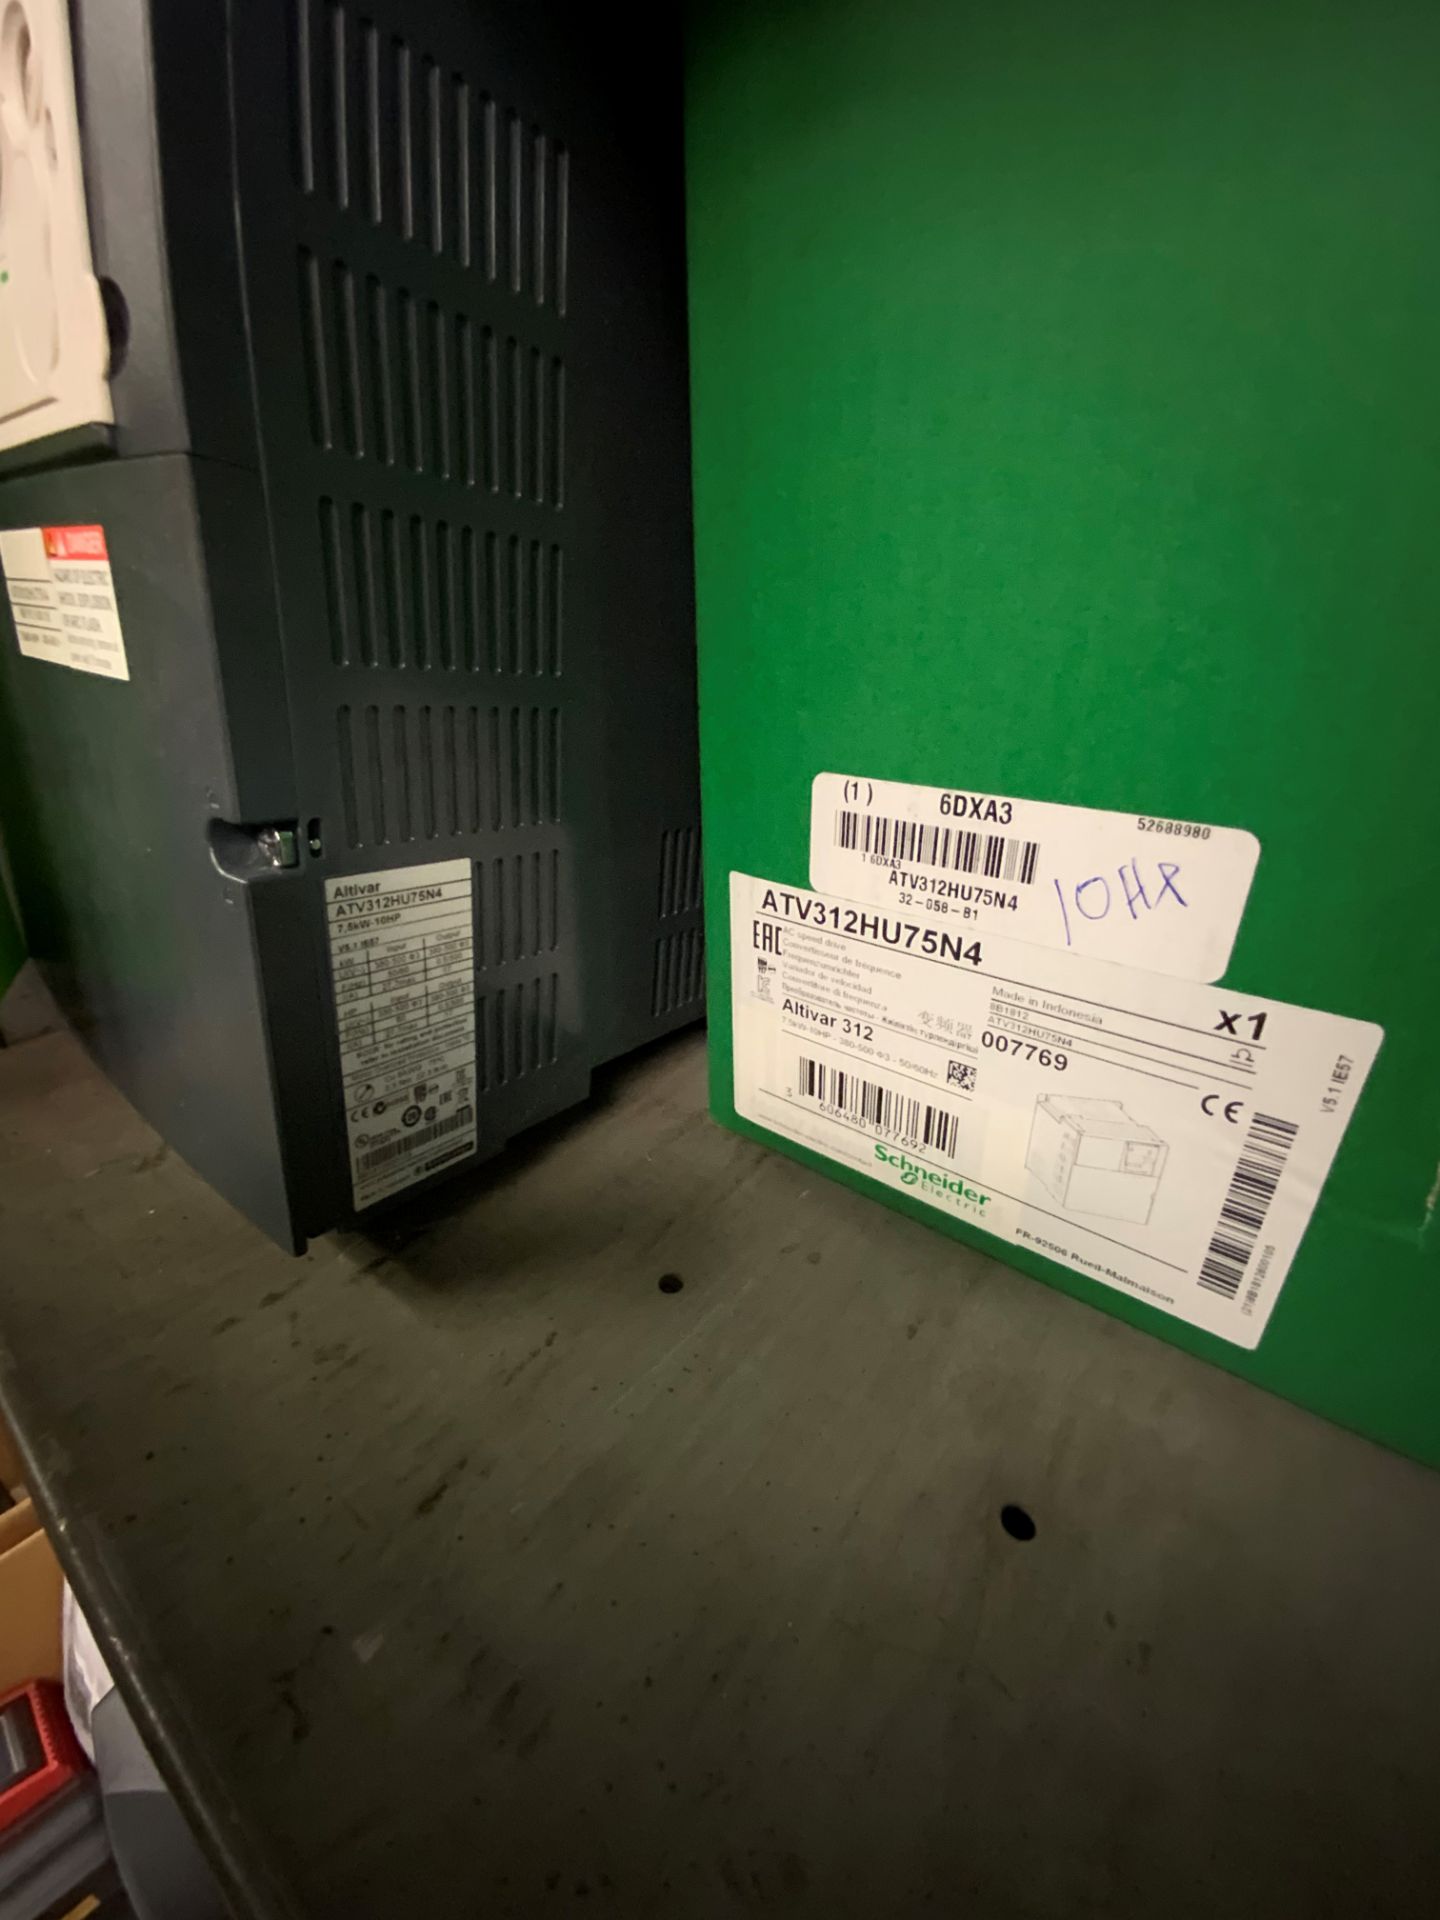 (2) SCHNEIDER ELECTRIC 10 HP AC SPEED DRIVE(S) & APC SMART UPS 750 - SEE PICTURES - Image 2 of 3